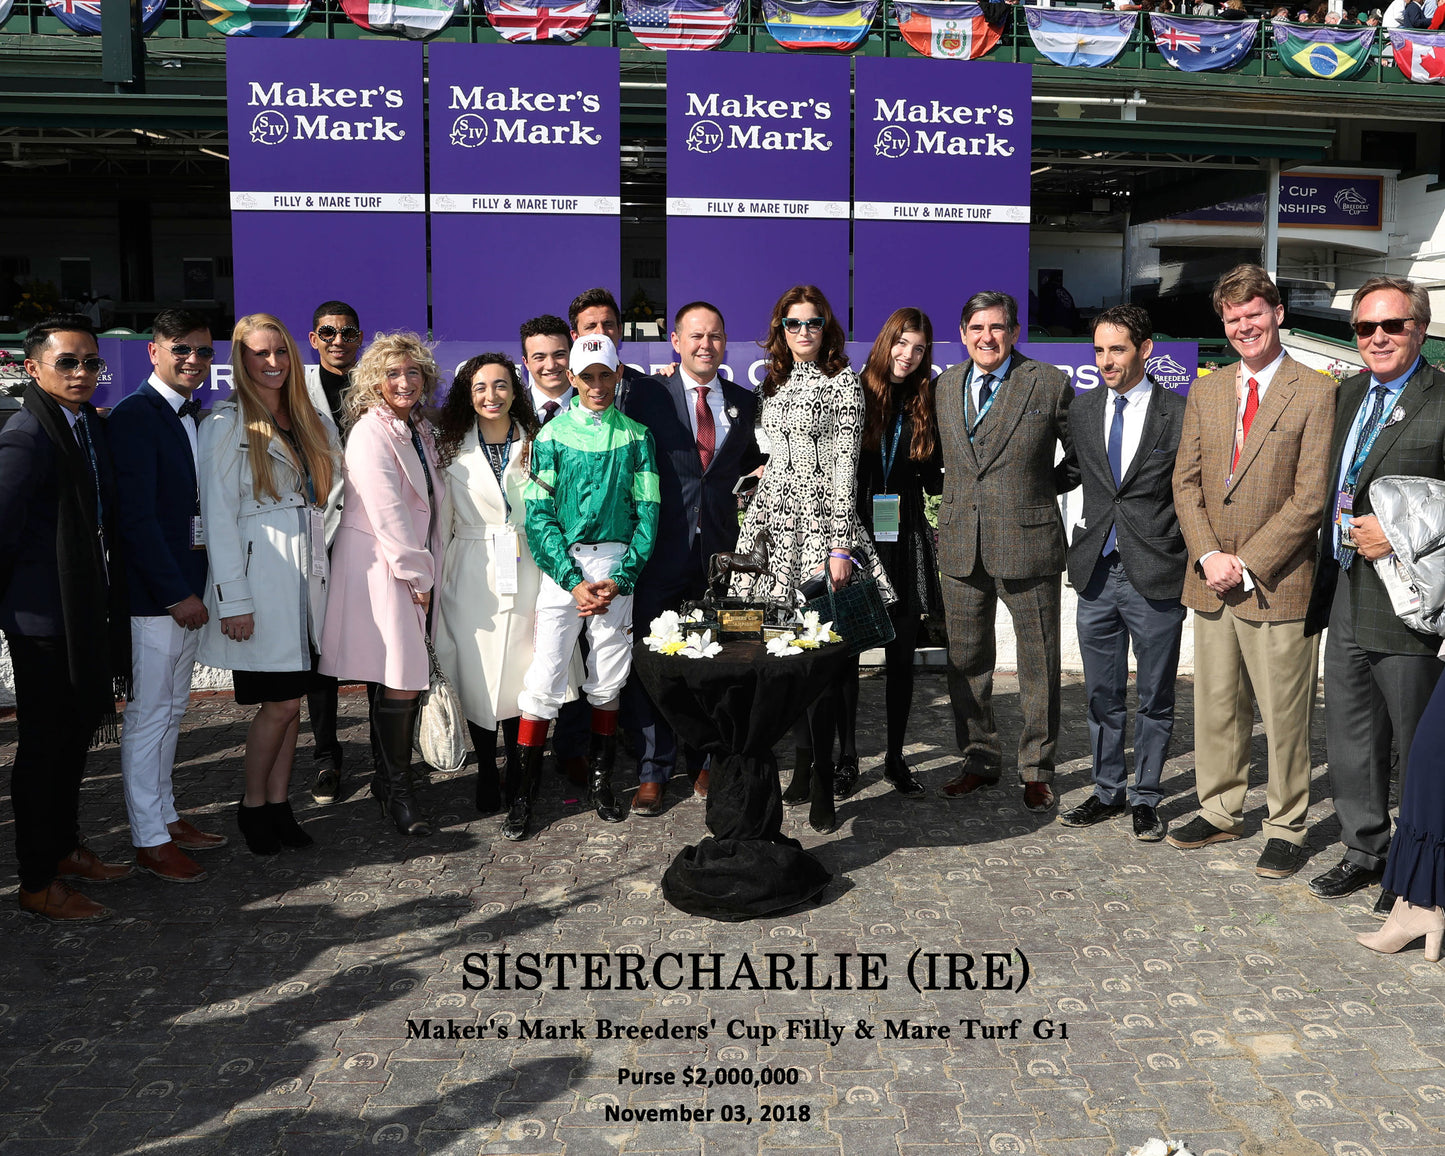 SISTERCHARLIE (IRE) - Maker's Mark Breeders' Cup Filly & Mare Turf G1 - 11-03-18 - R06 - CD - Presentation 01 W Ident